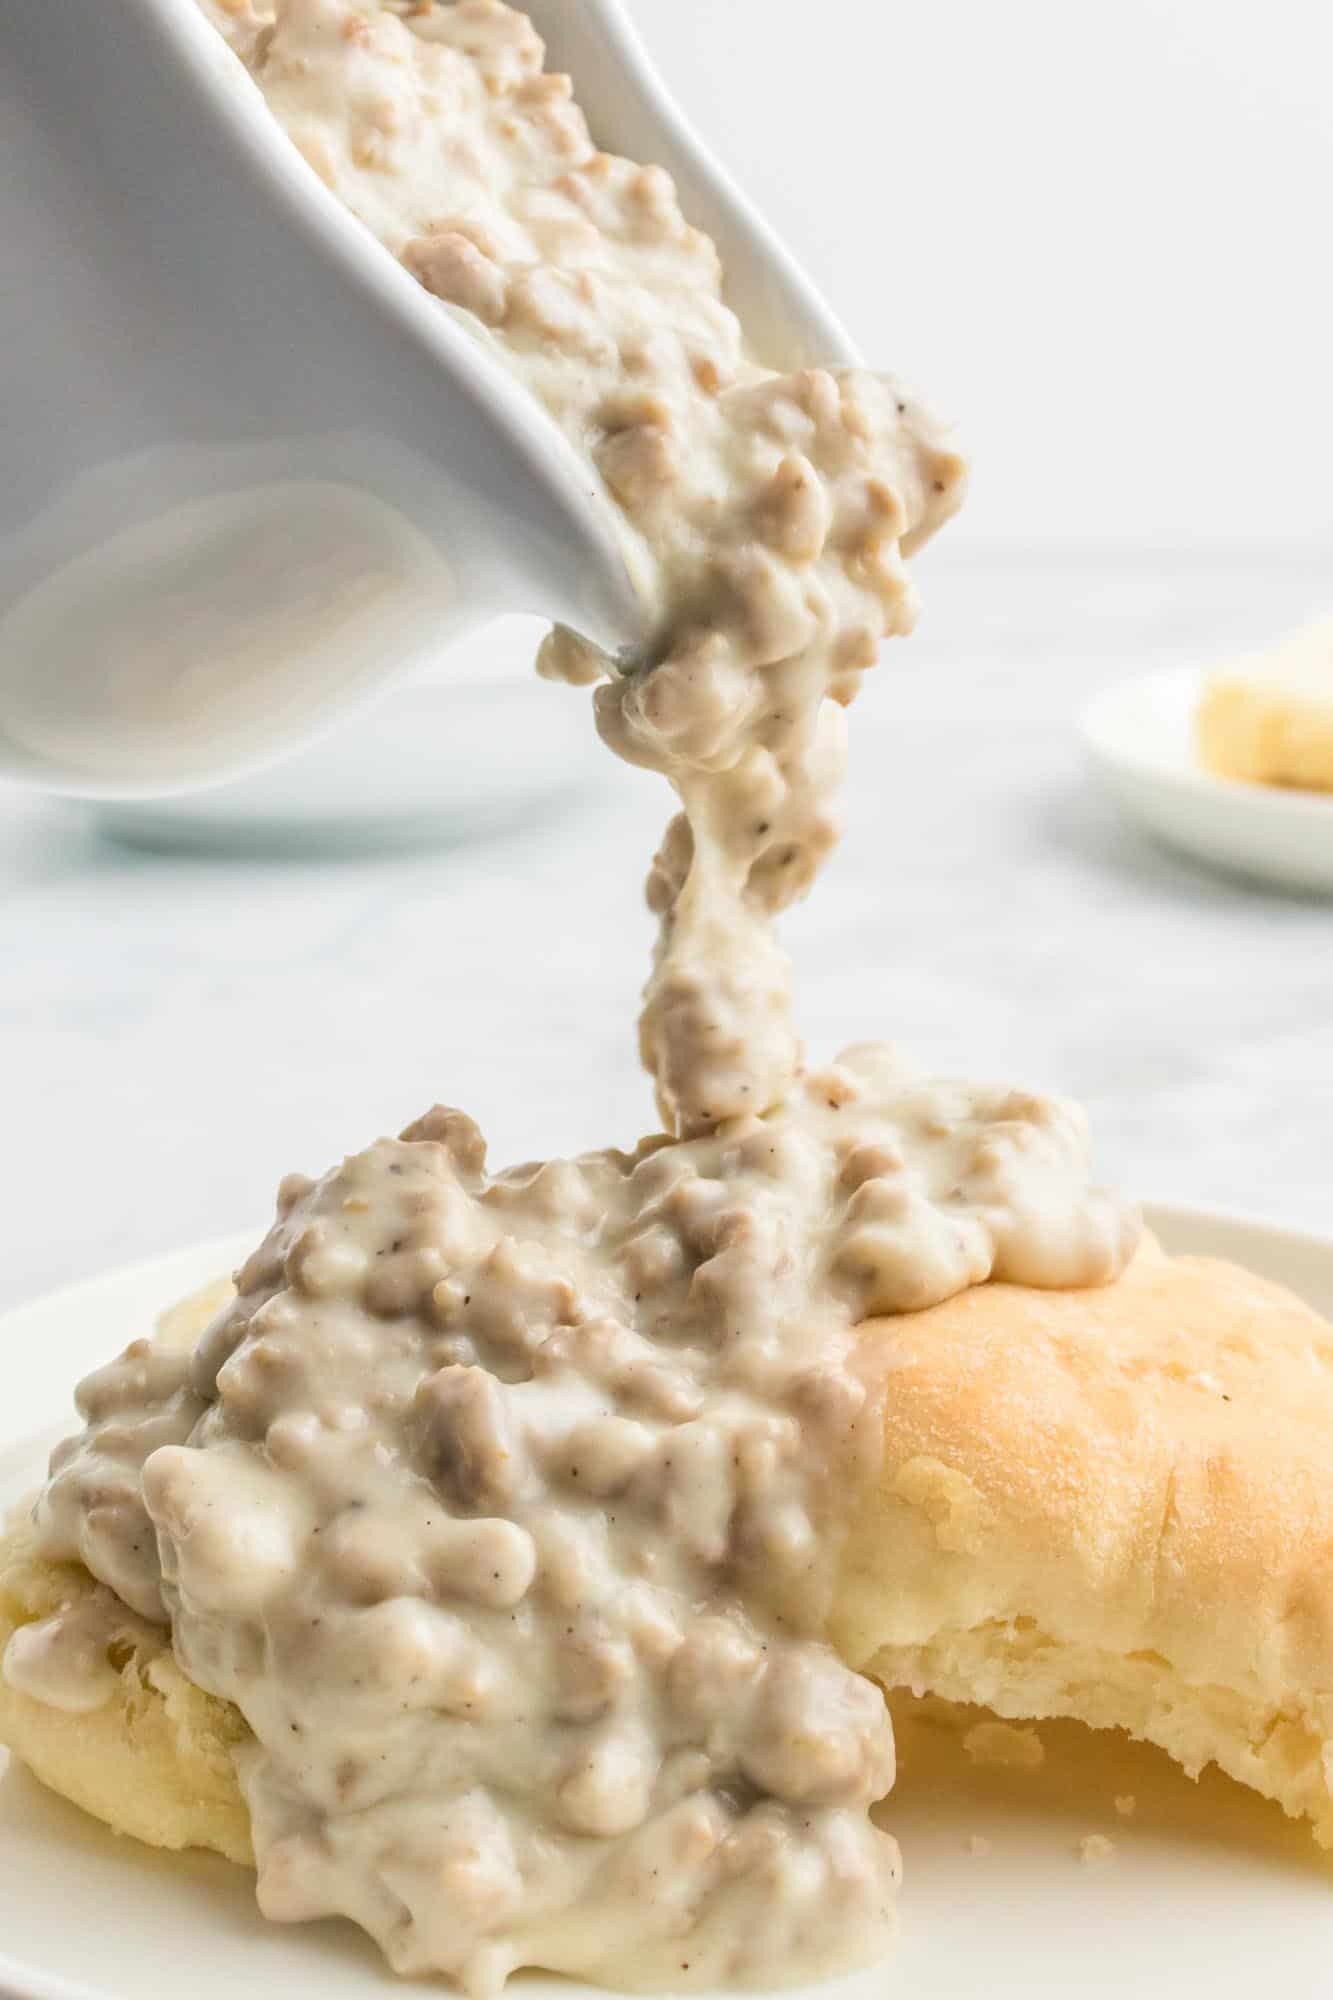 Pouring sausage gravy over biscuits